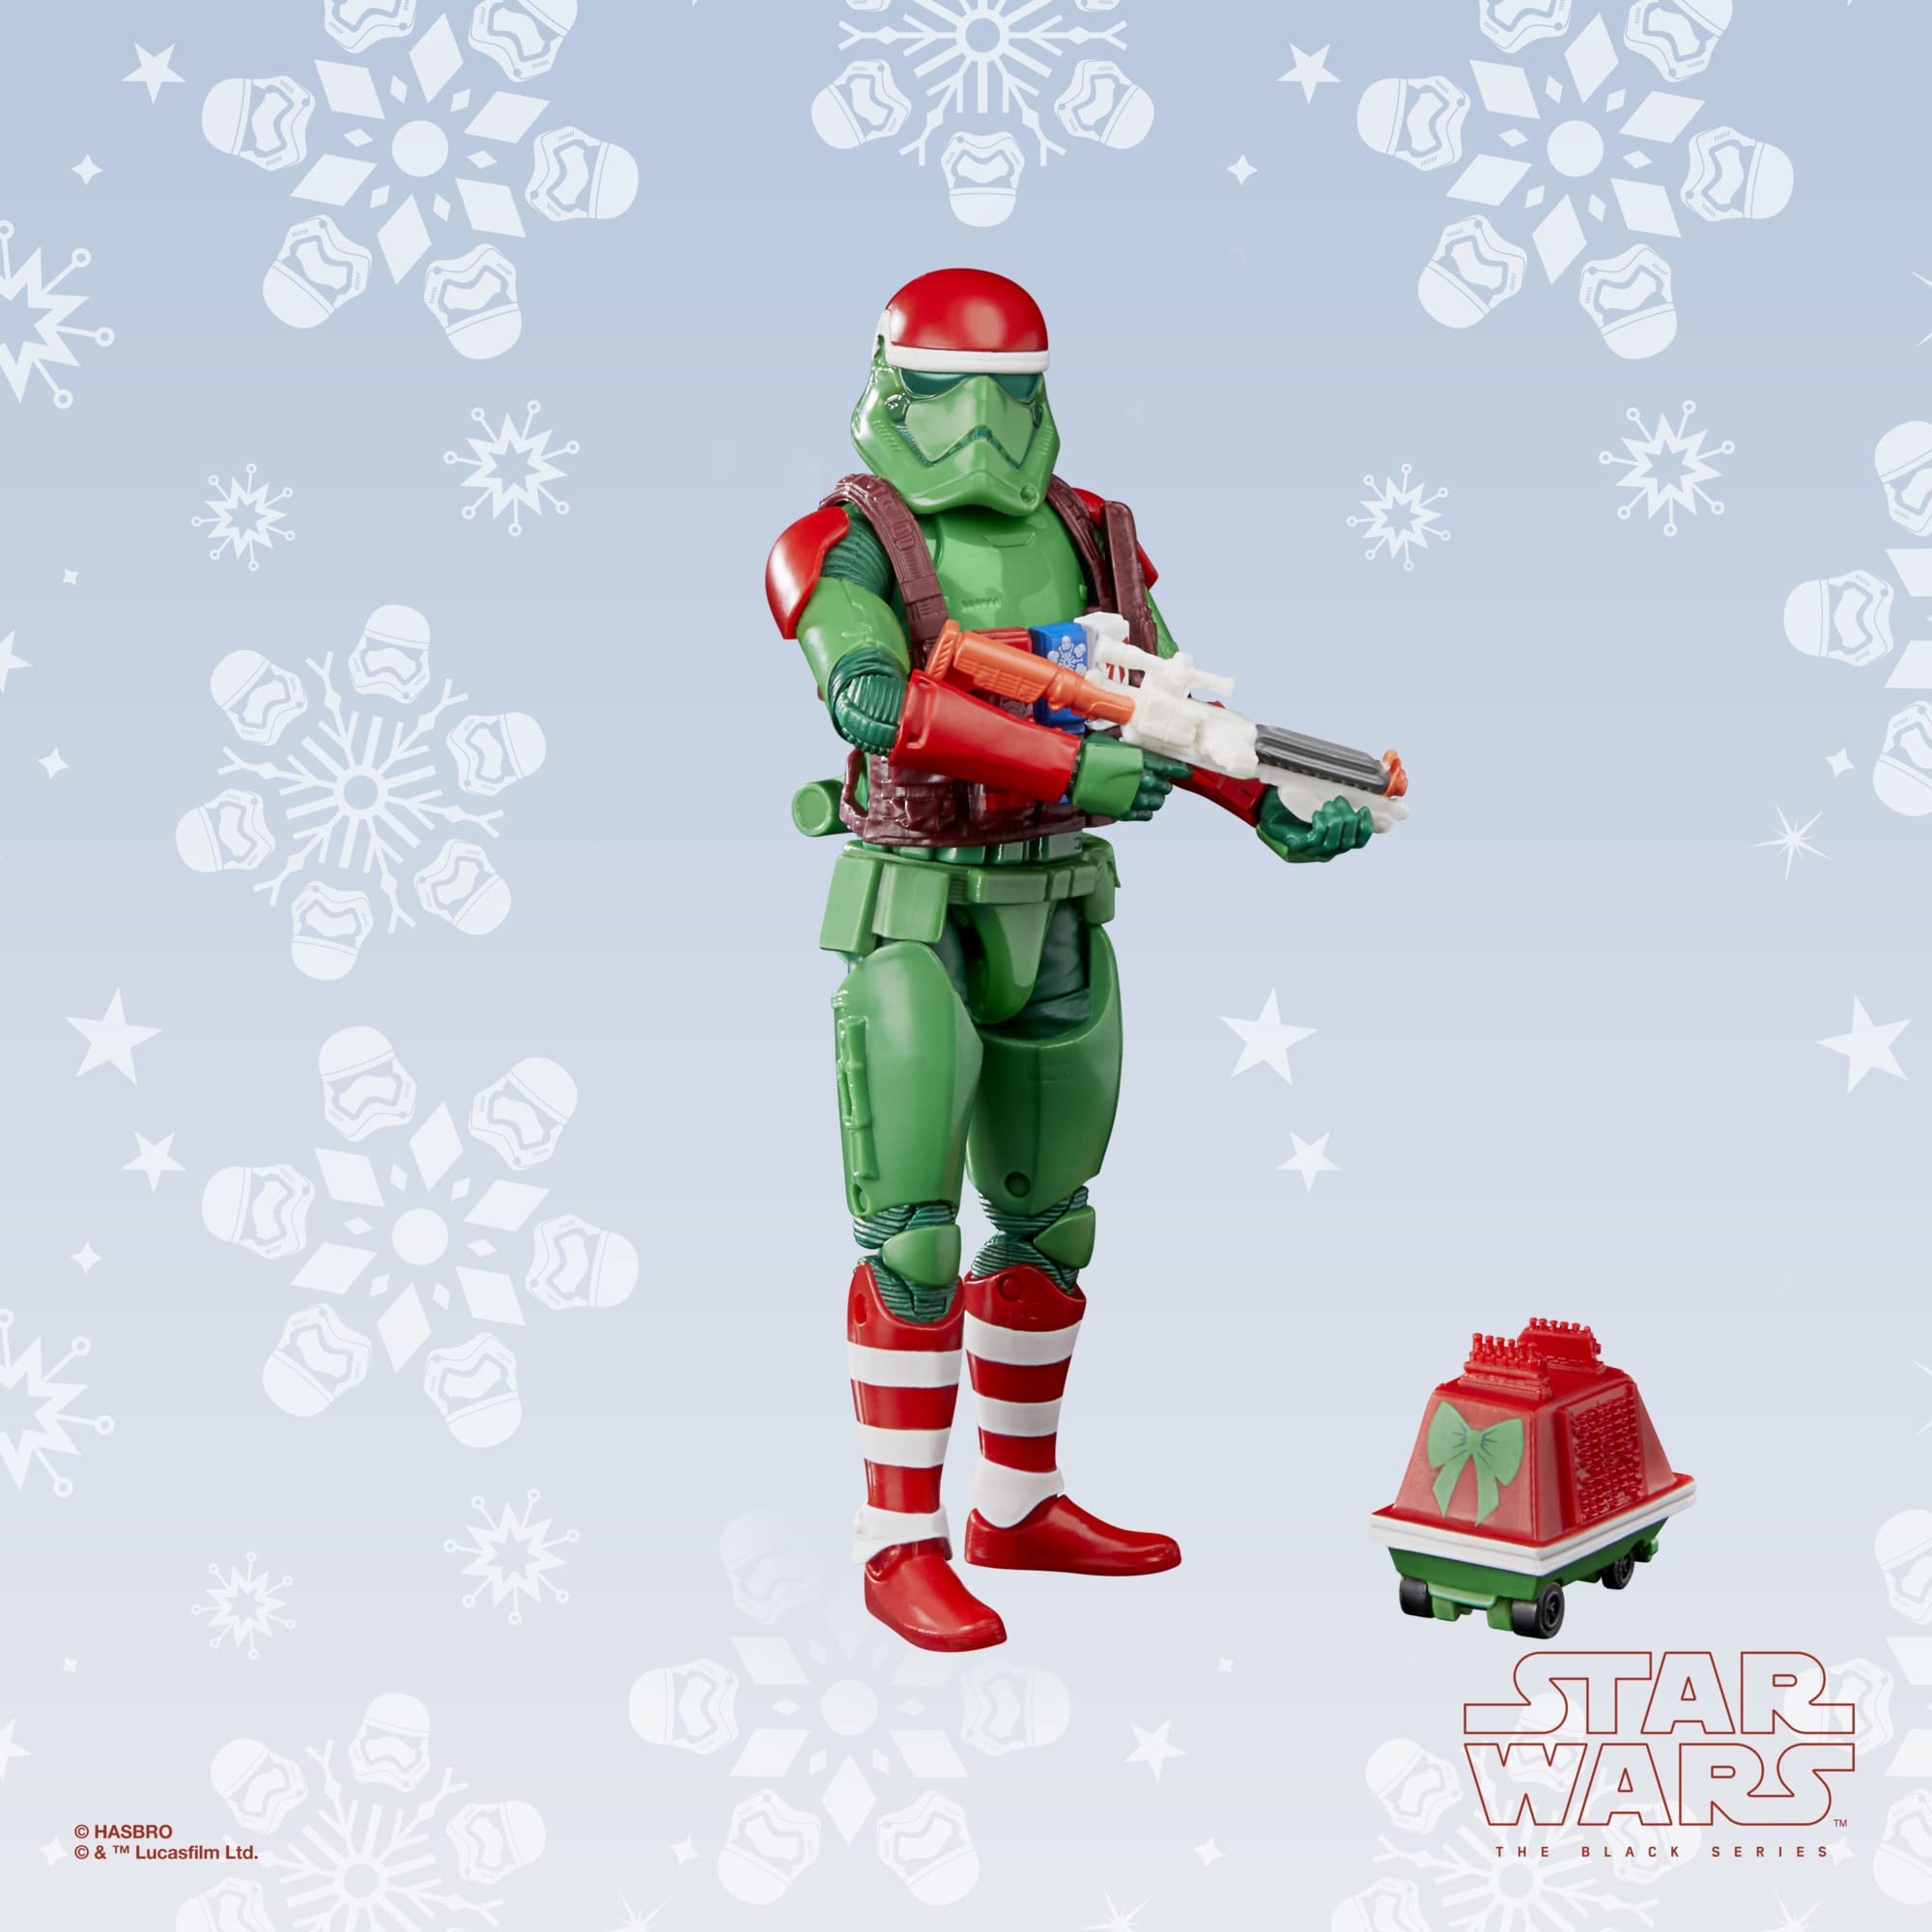 STAR WARS The Black Series First Order Stormtrooper (Holiday Edition) and Mouse Droid Toys, 6-Inch-Scale Holiday-Themed Collectible Figures (Amazon Exclusive)